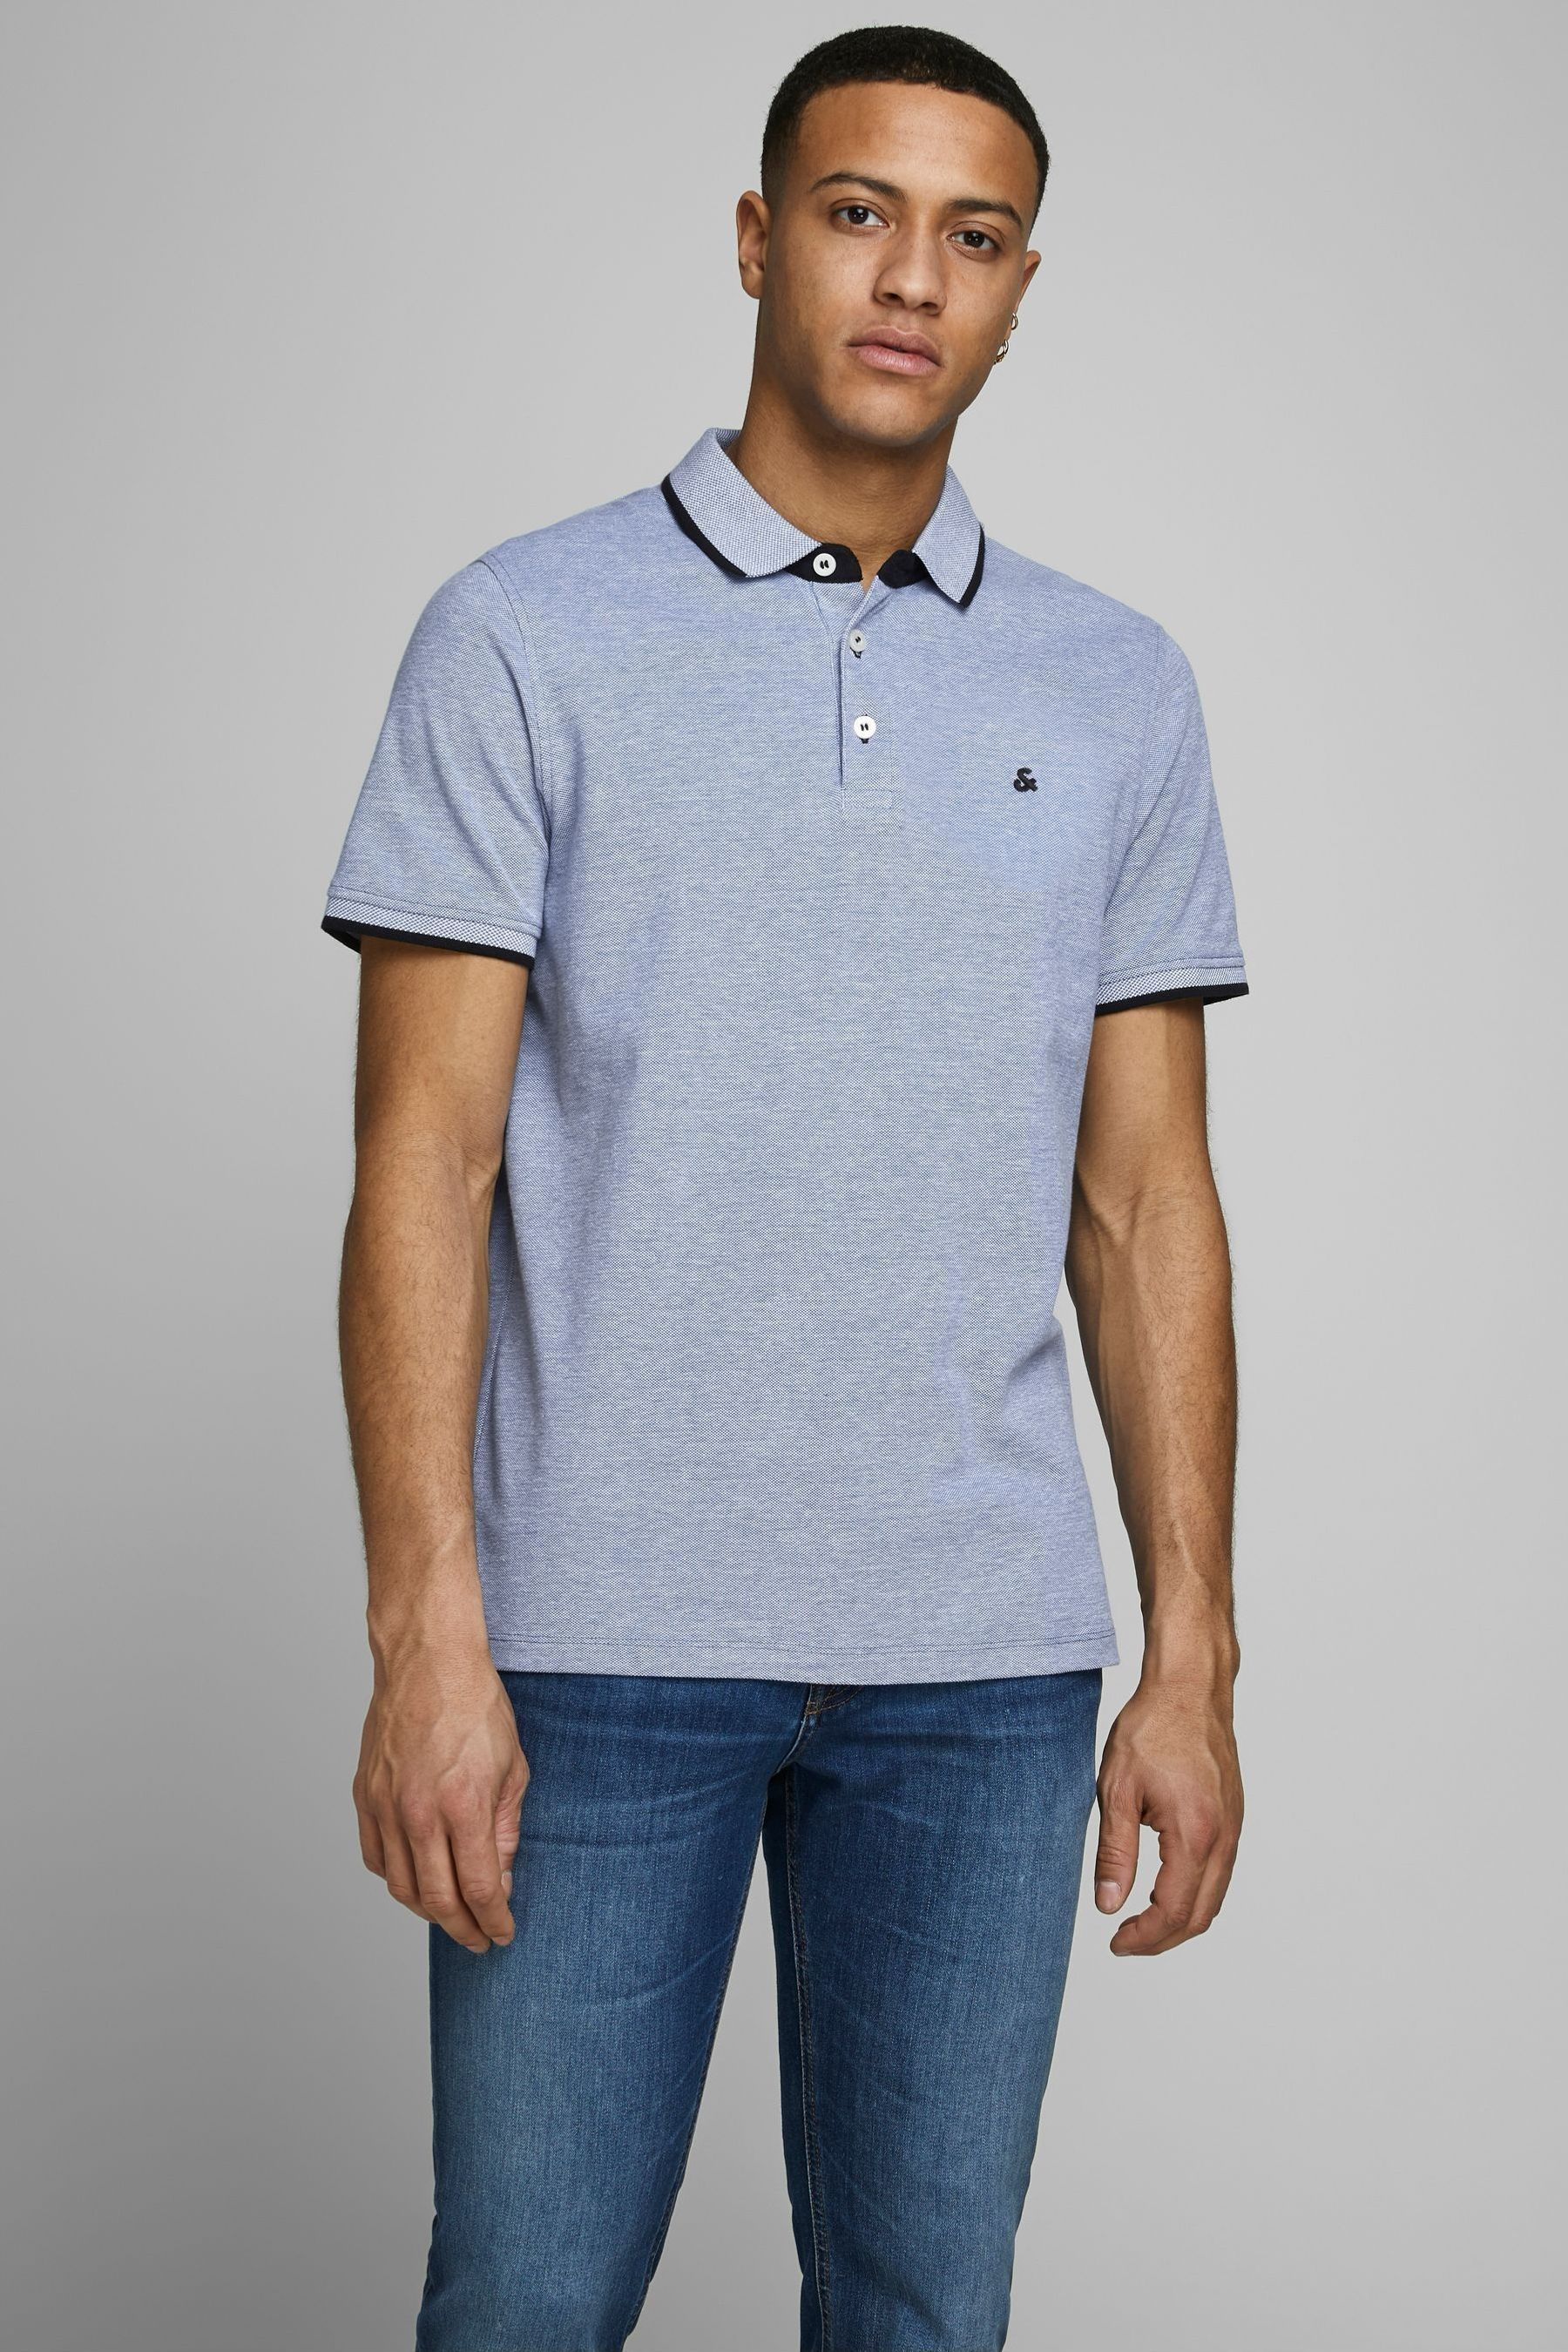 Buy Jack & Jones Mid Blue Polo Shirt from the Next UK online shop